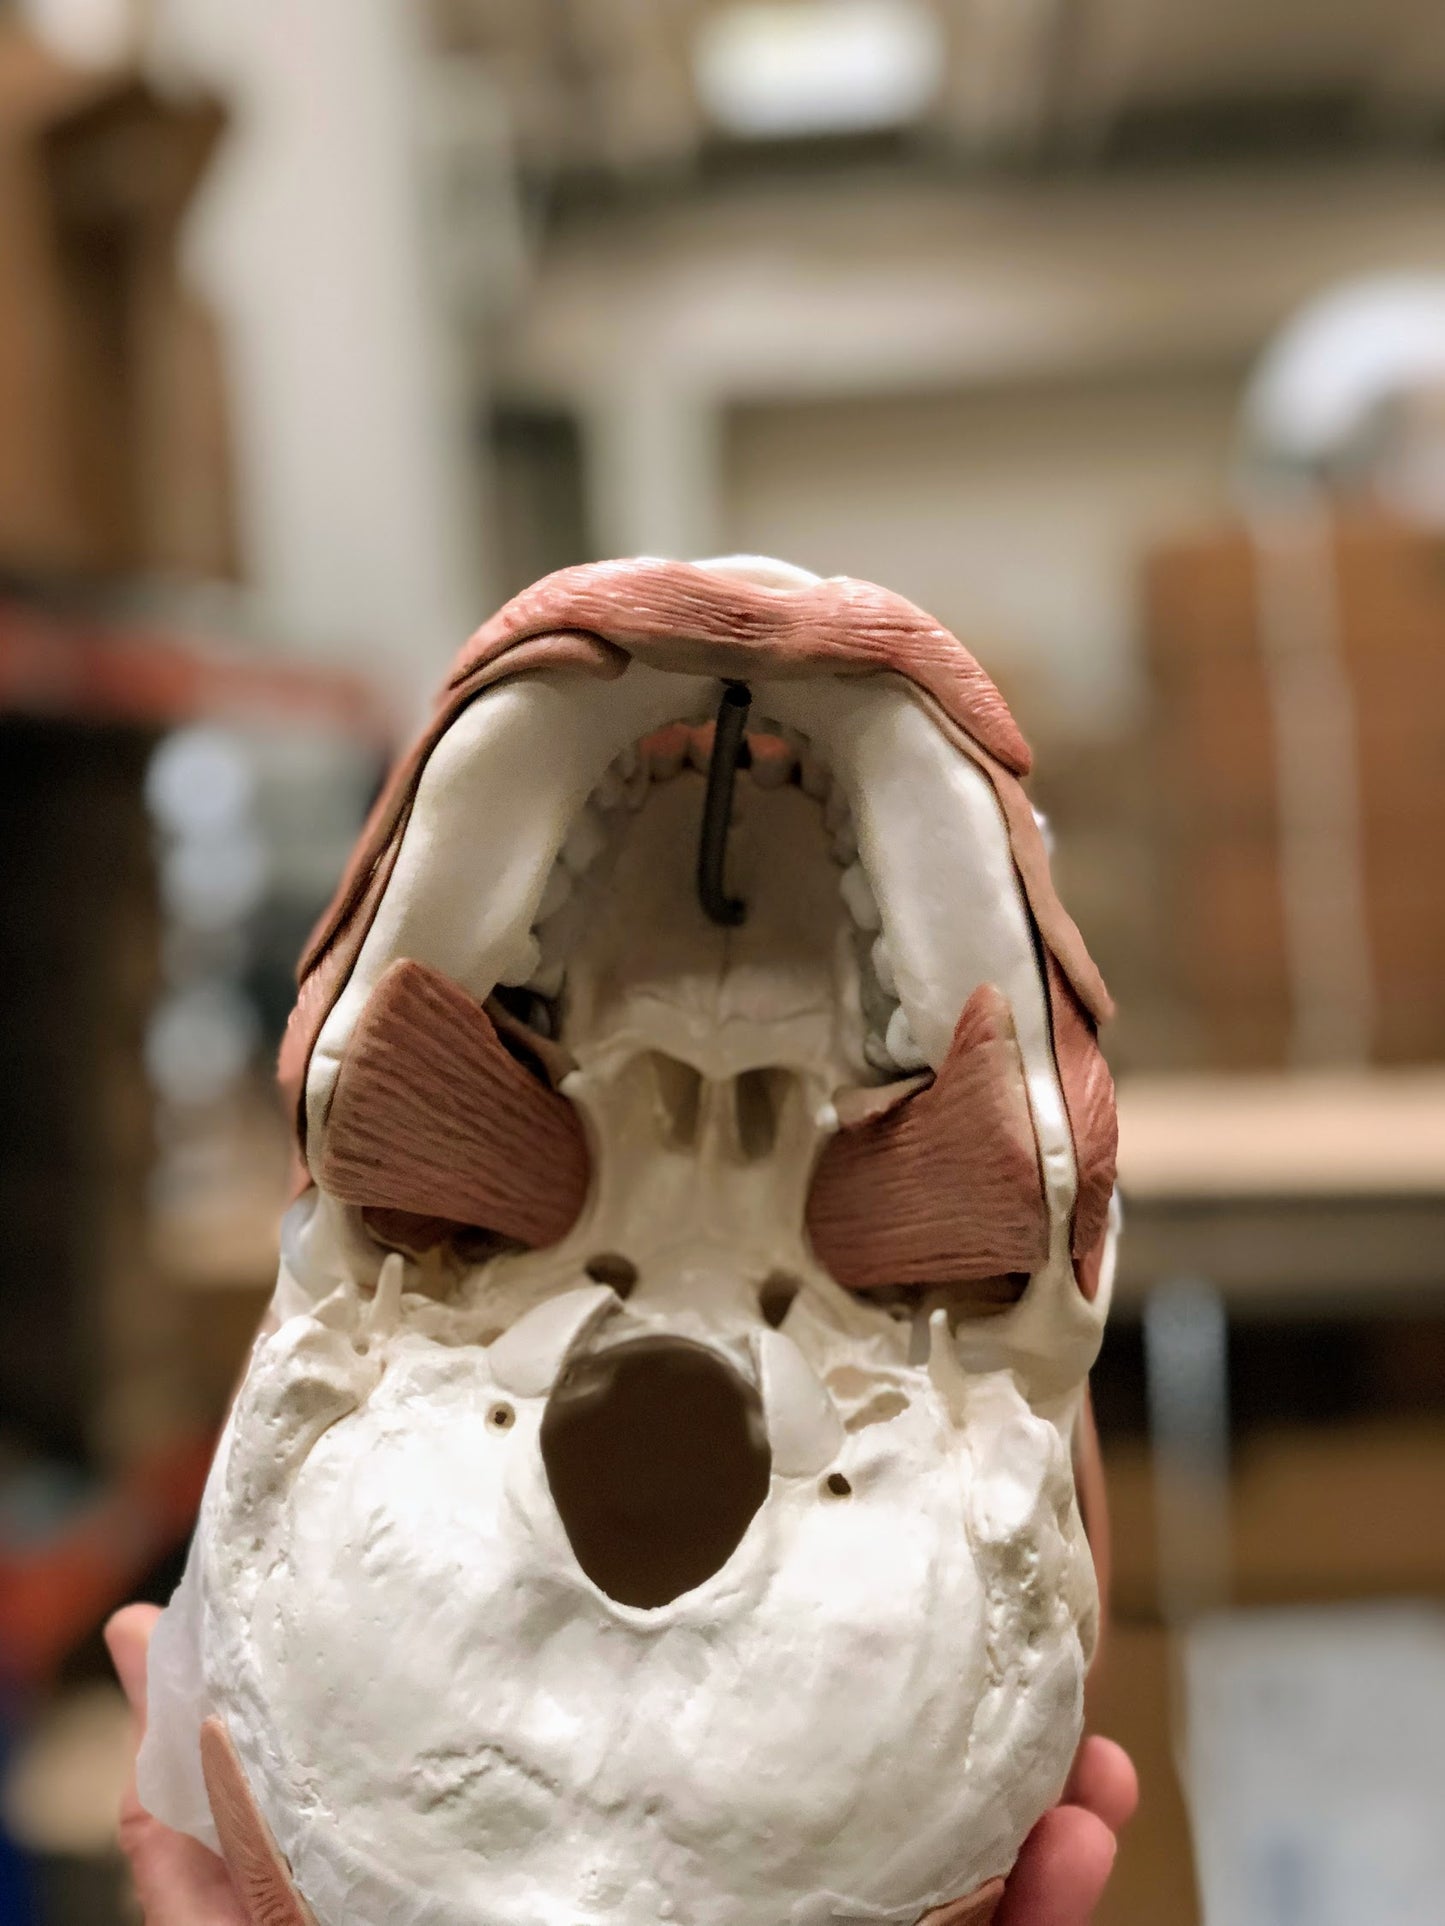 Skull model with 38 removable masticatory and facial muscles